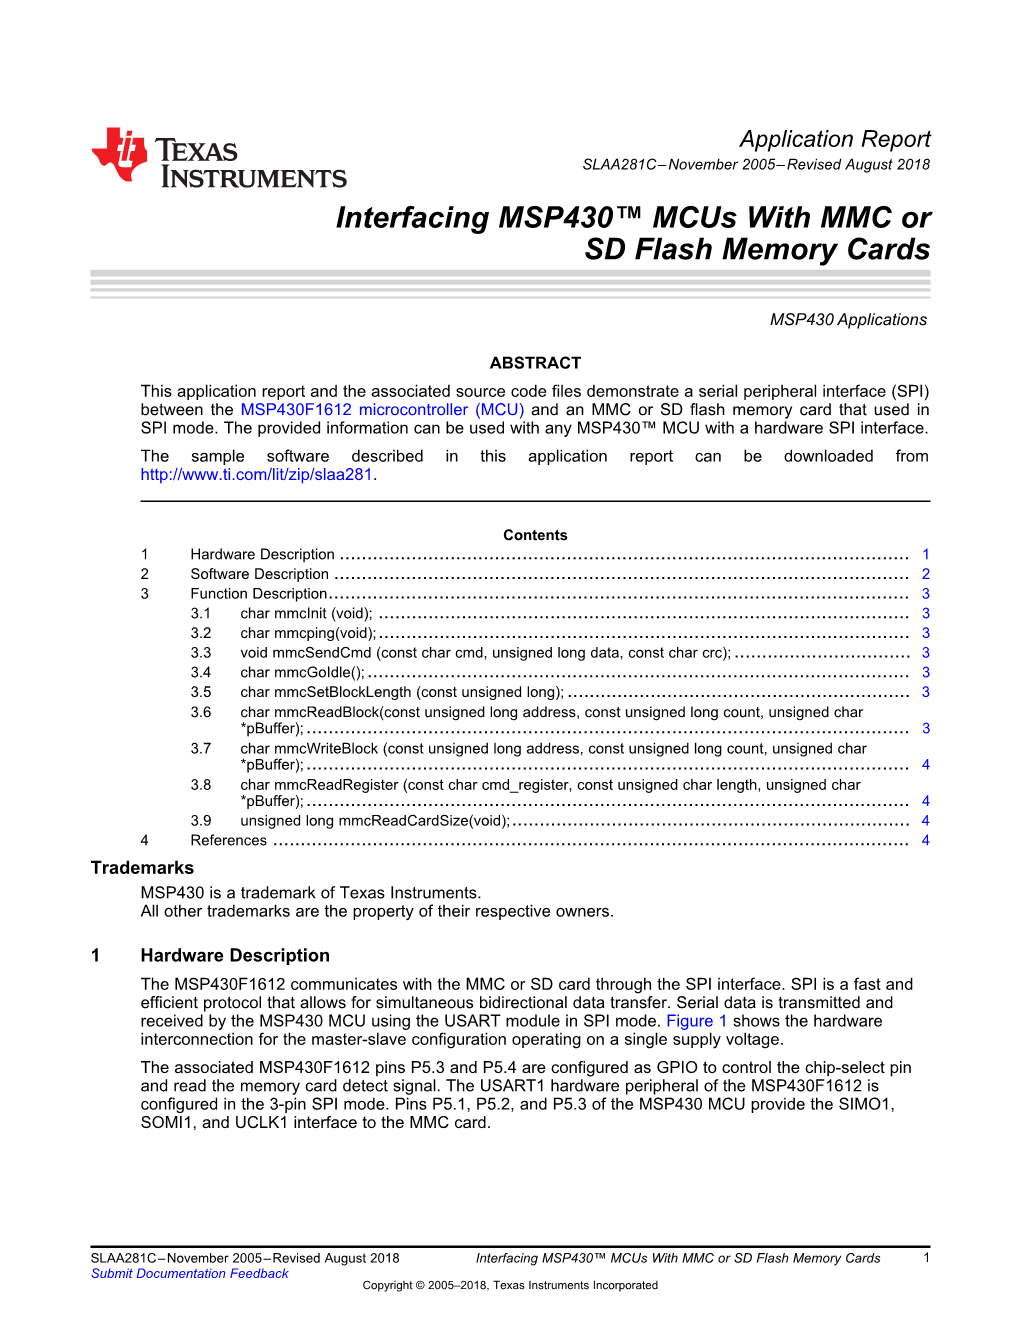 Interfacing MSP430™ Mcus with MMC Or SD Flash Memory Cards